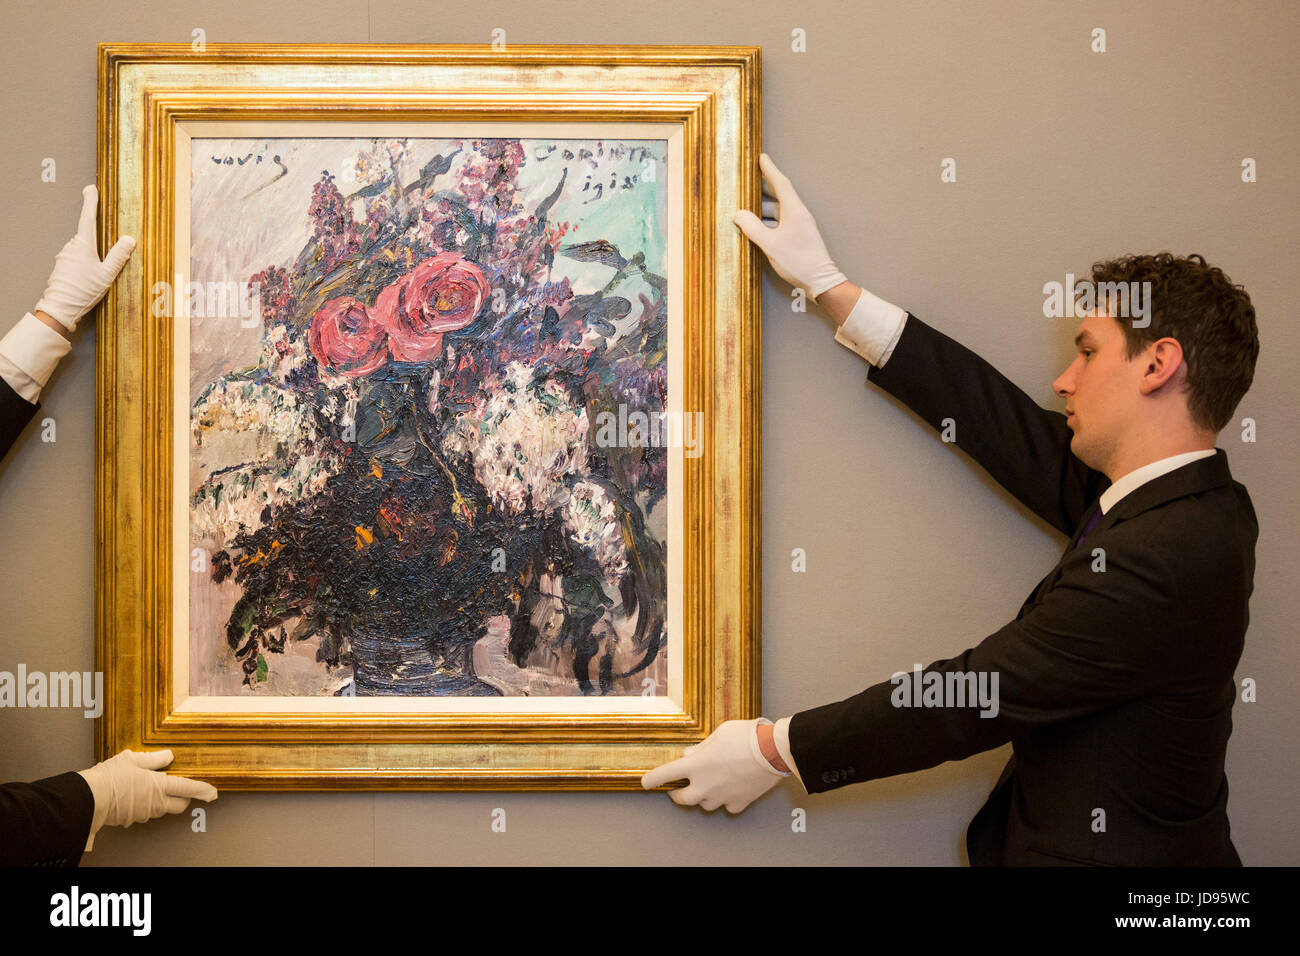 London, UK. 19 June 2017. Lovis Corinth, Rosen und Flieder. Estimated at GBP 250,000-350,000. Bonhams presents a preview of the Bonhams Impressionist and Modern Art Sale which will take place on 22 June 2017. Stock Photo